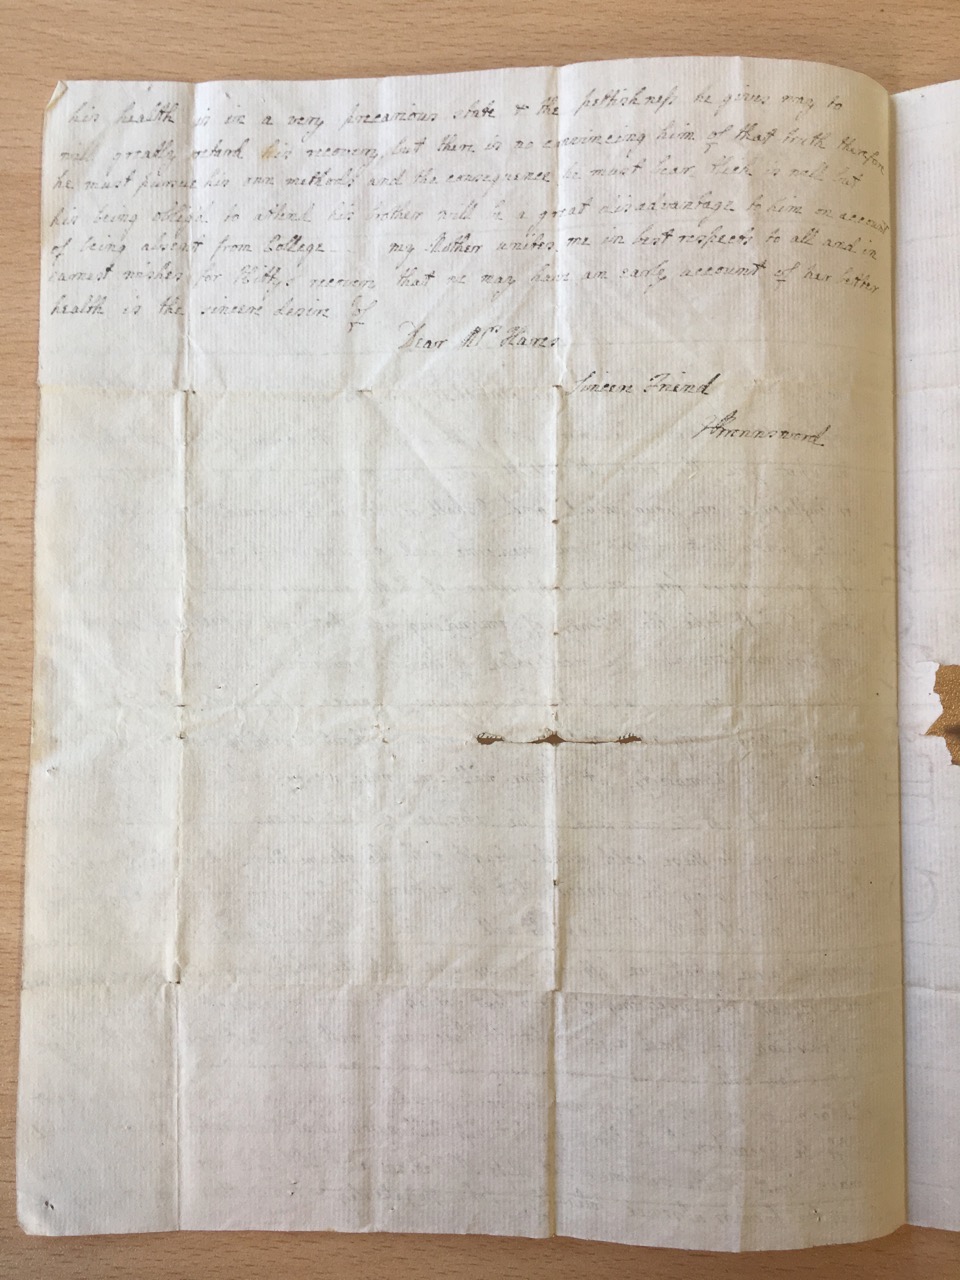 Image #2 of letter: J[enny] Brownsword to Ann Hare 25 April 1777